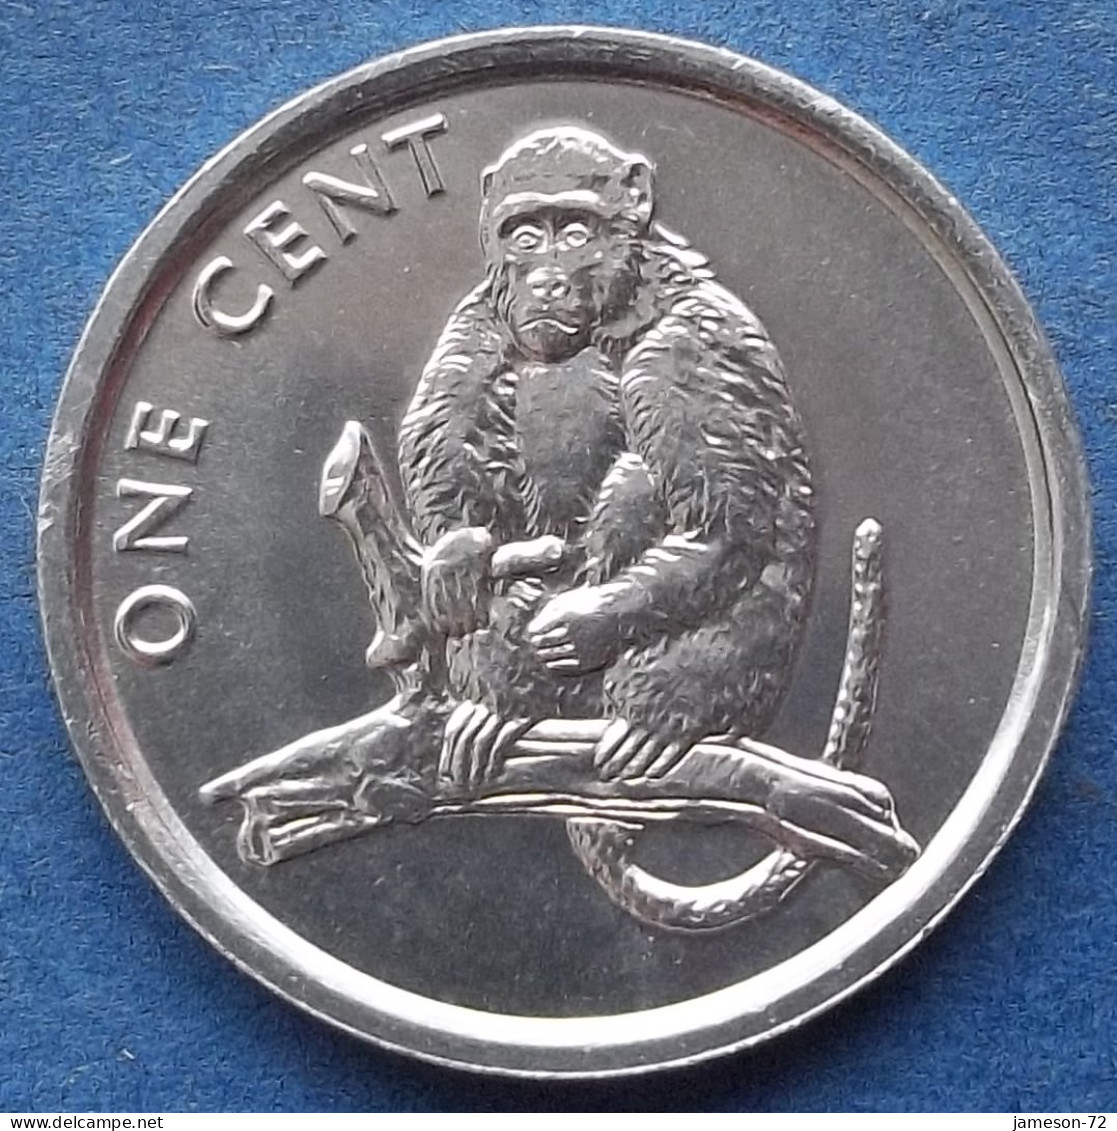 COOK ISLANDS - 1 Cent 2003 "Monkey On Branch" KM# 423 Dependency Of New Zealand Elizabeth II - Edelweiss Coins - Cook